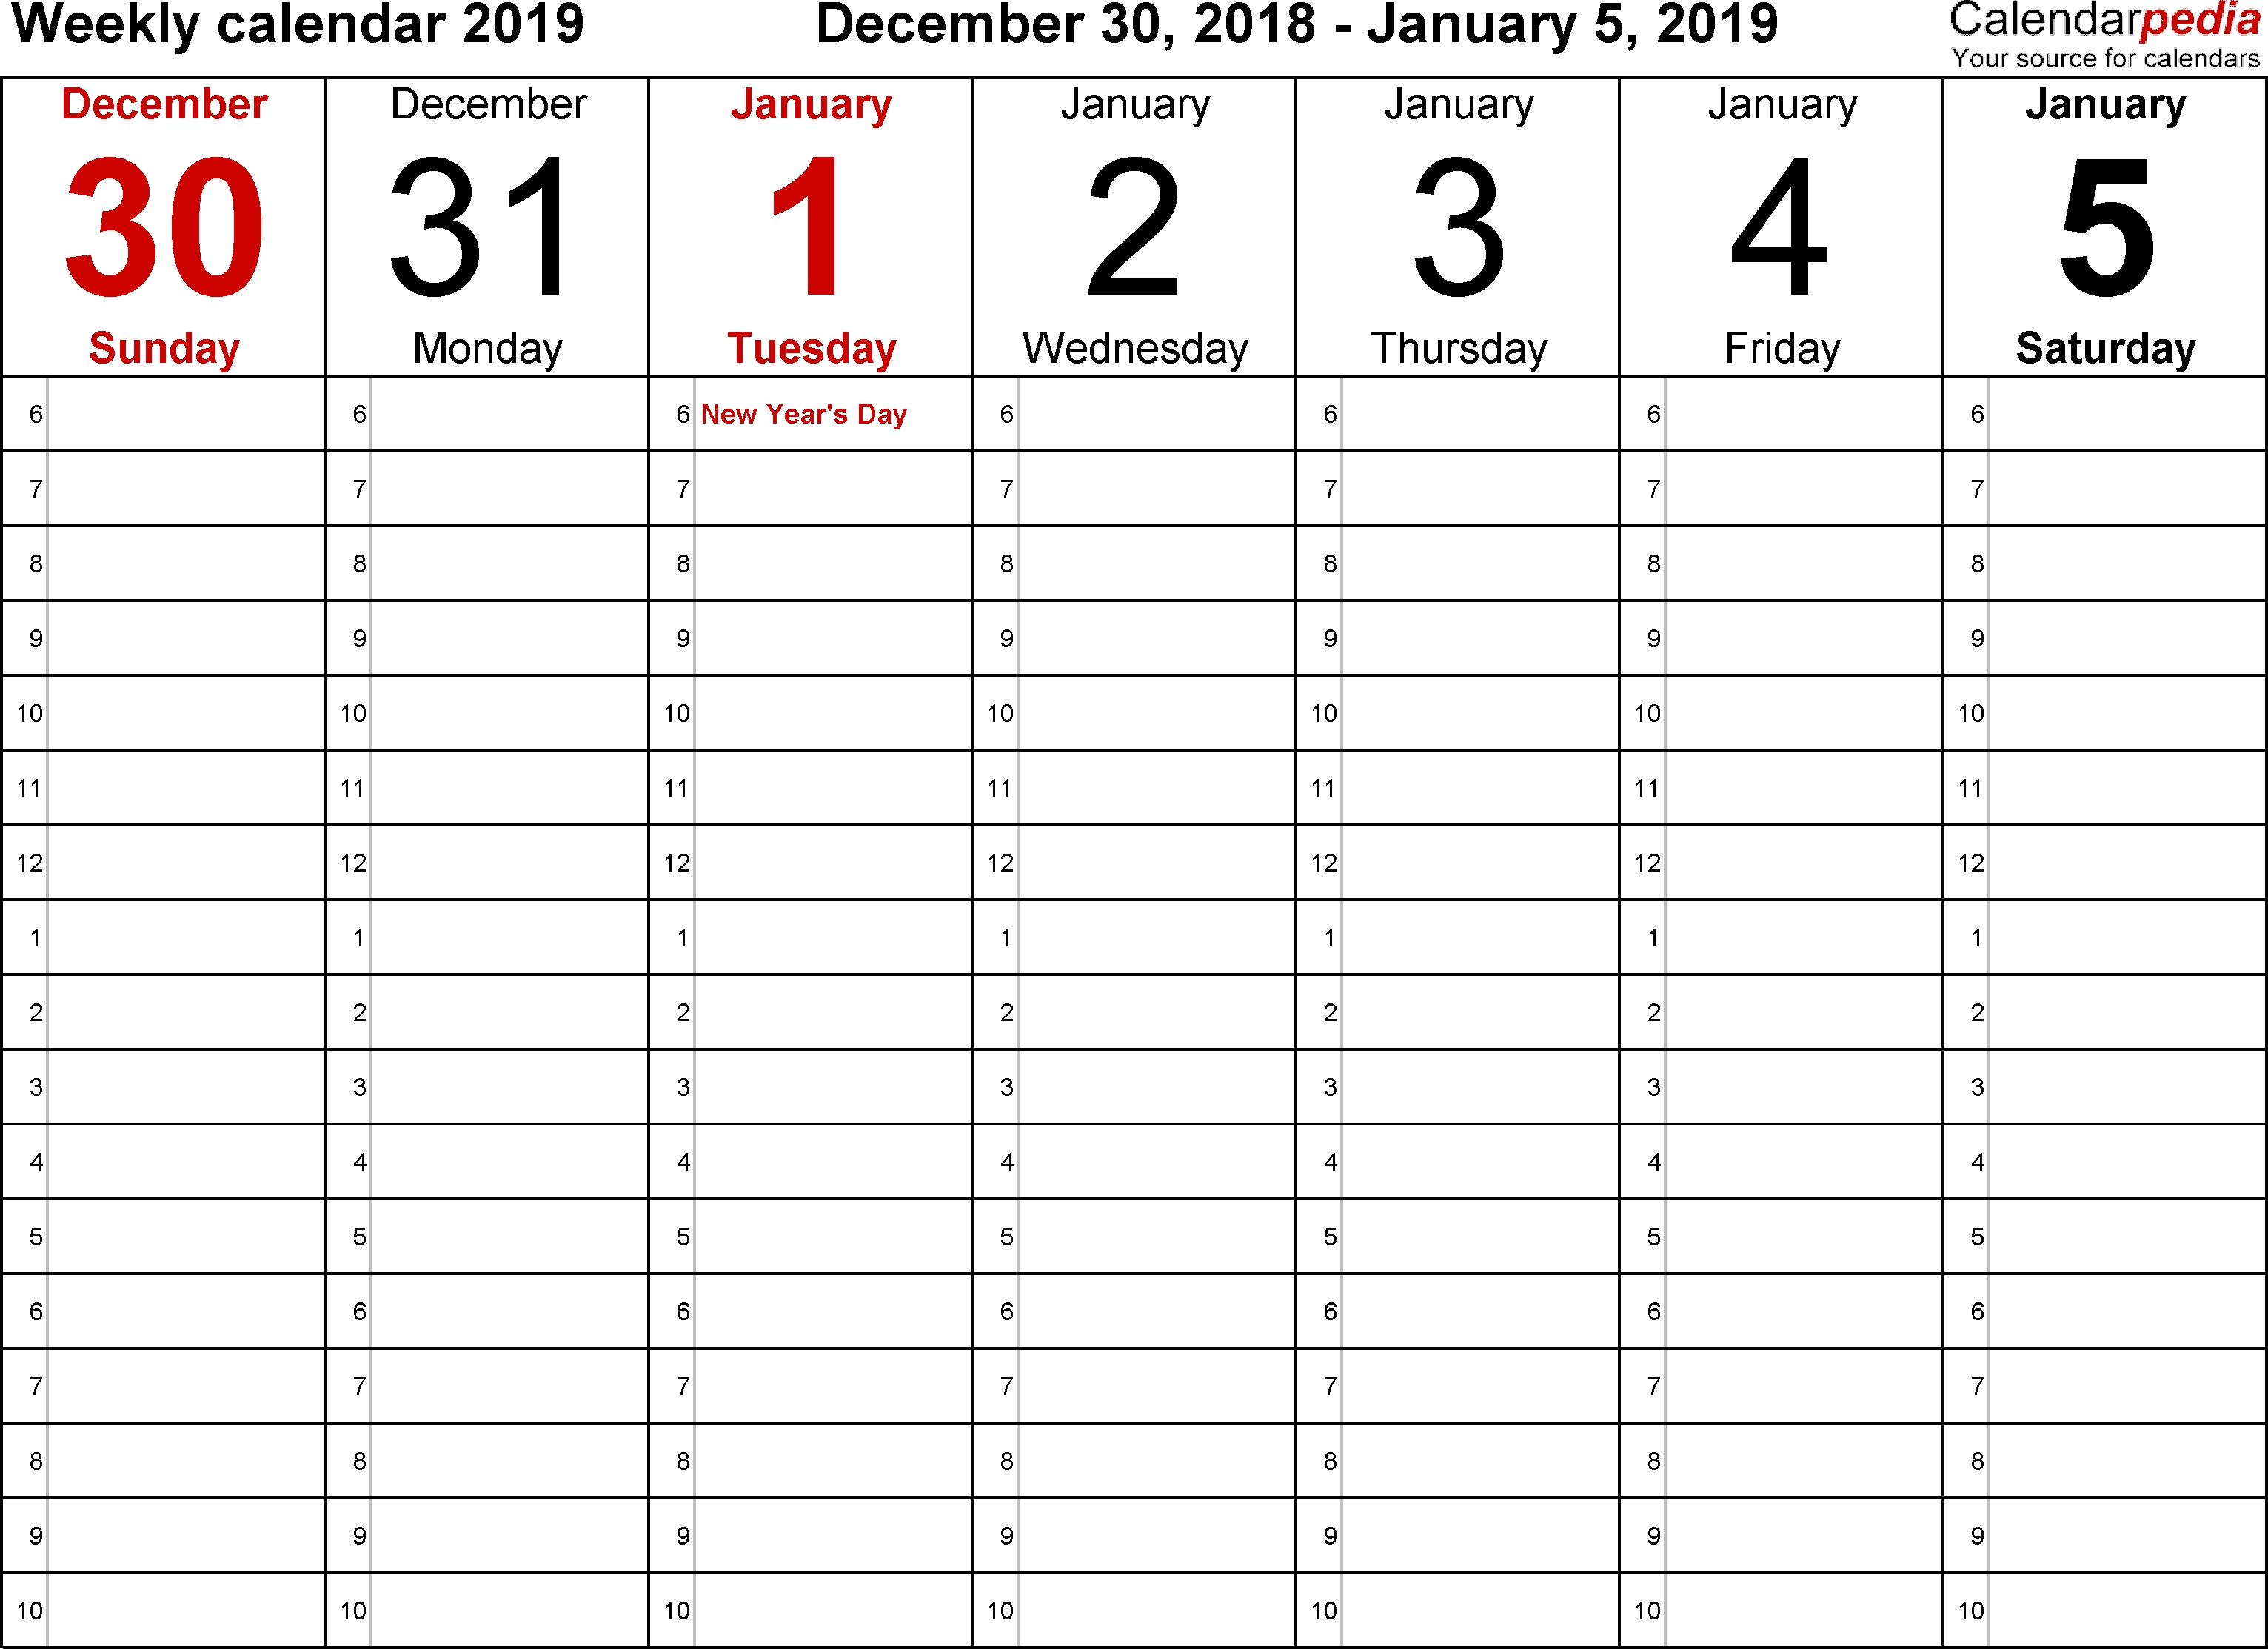 Weekly Calendar 2019 For Word - 12 Free Printable Templates intended for Free Printable Blank Weekly Calendar Templates